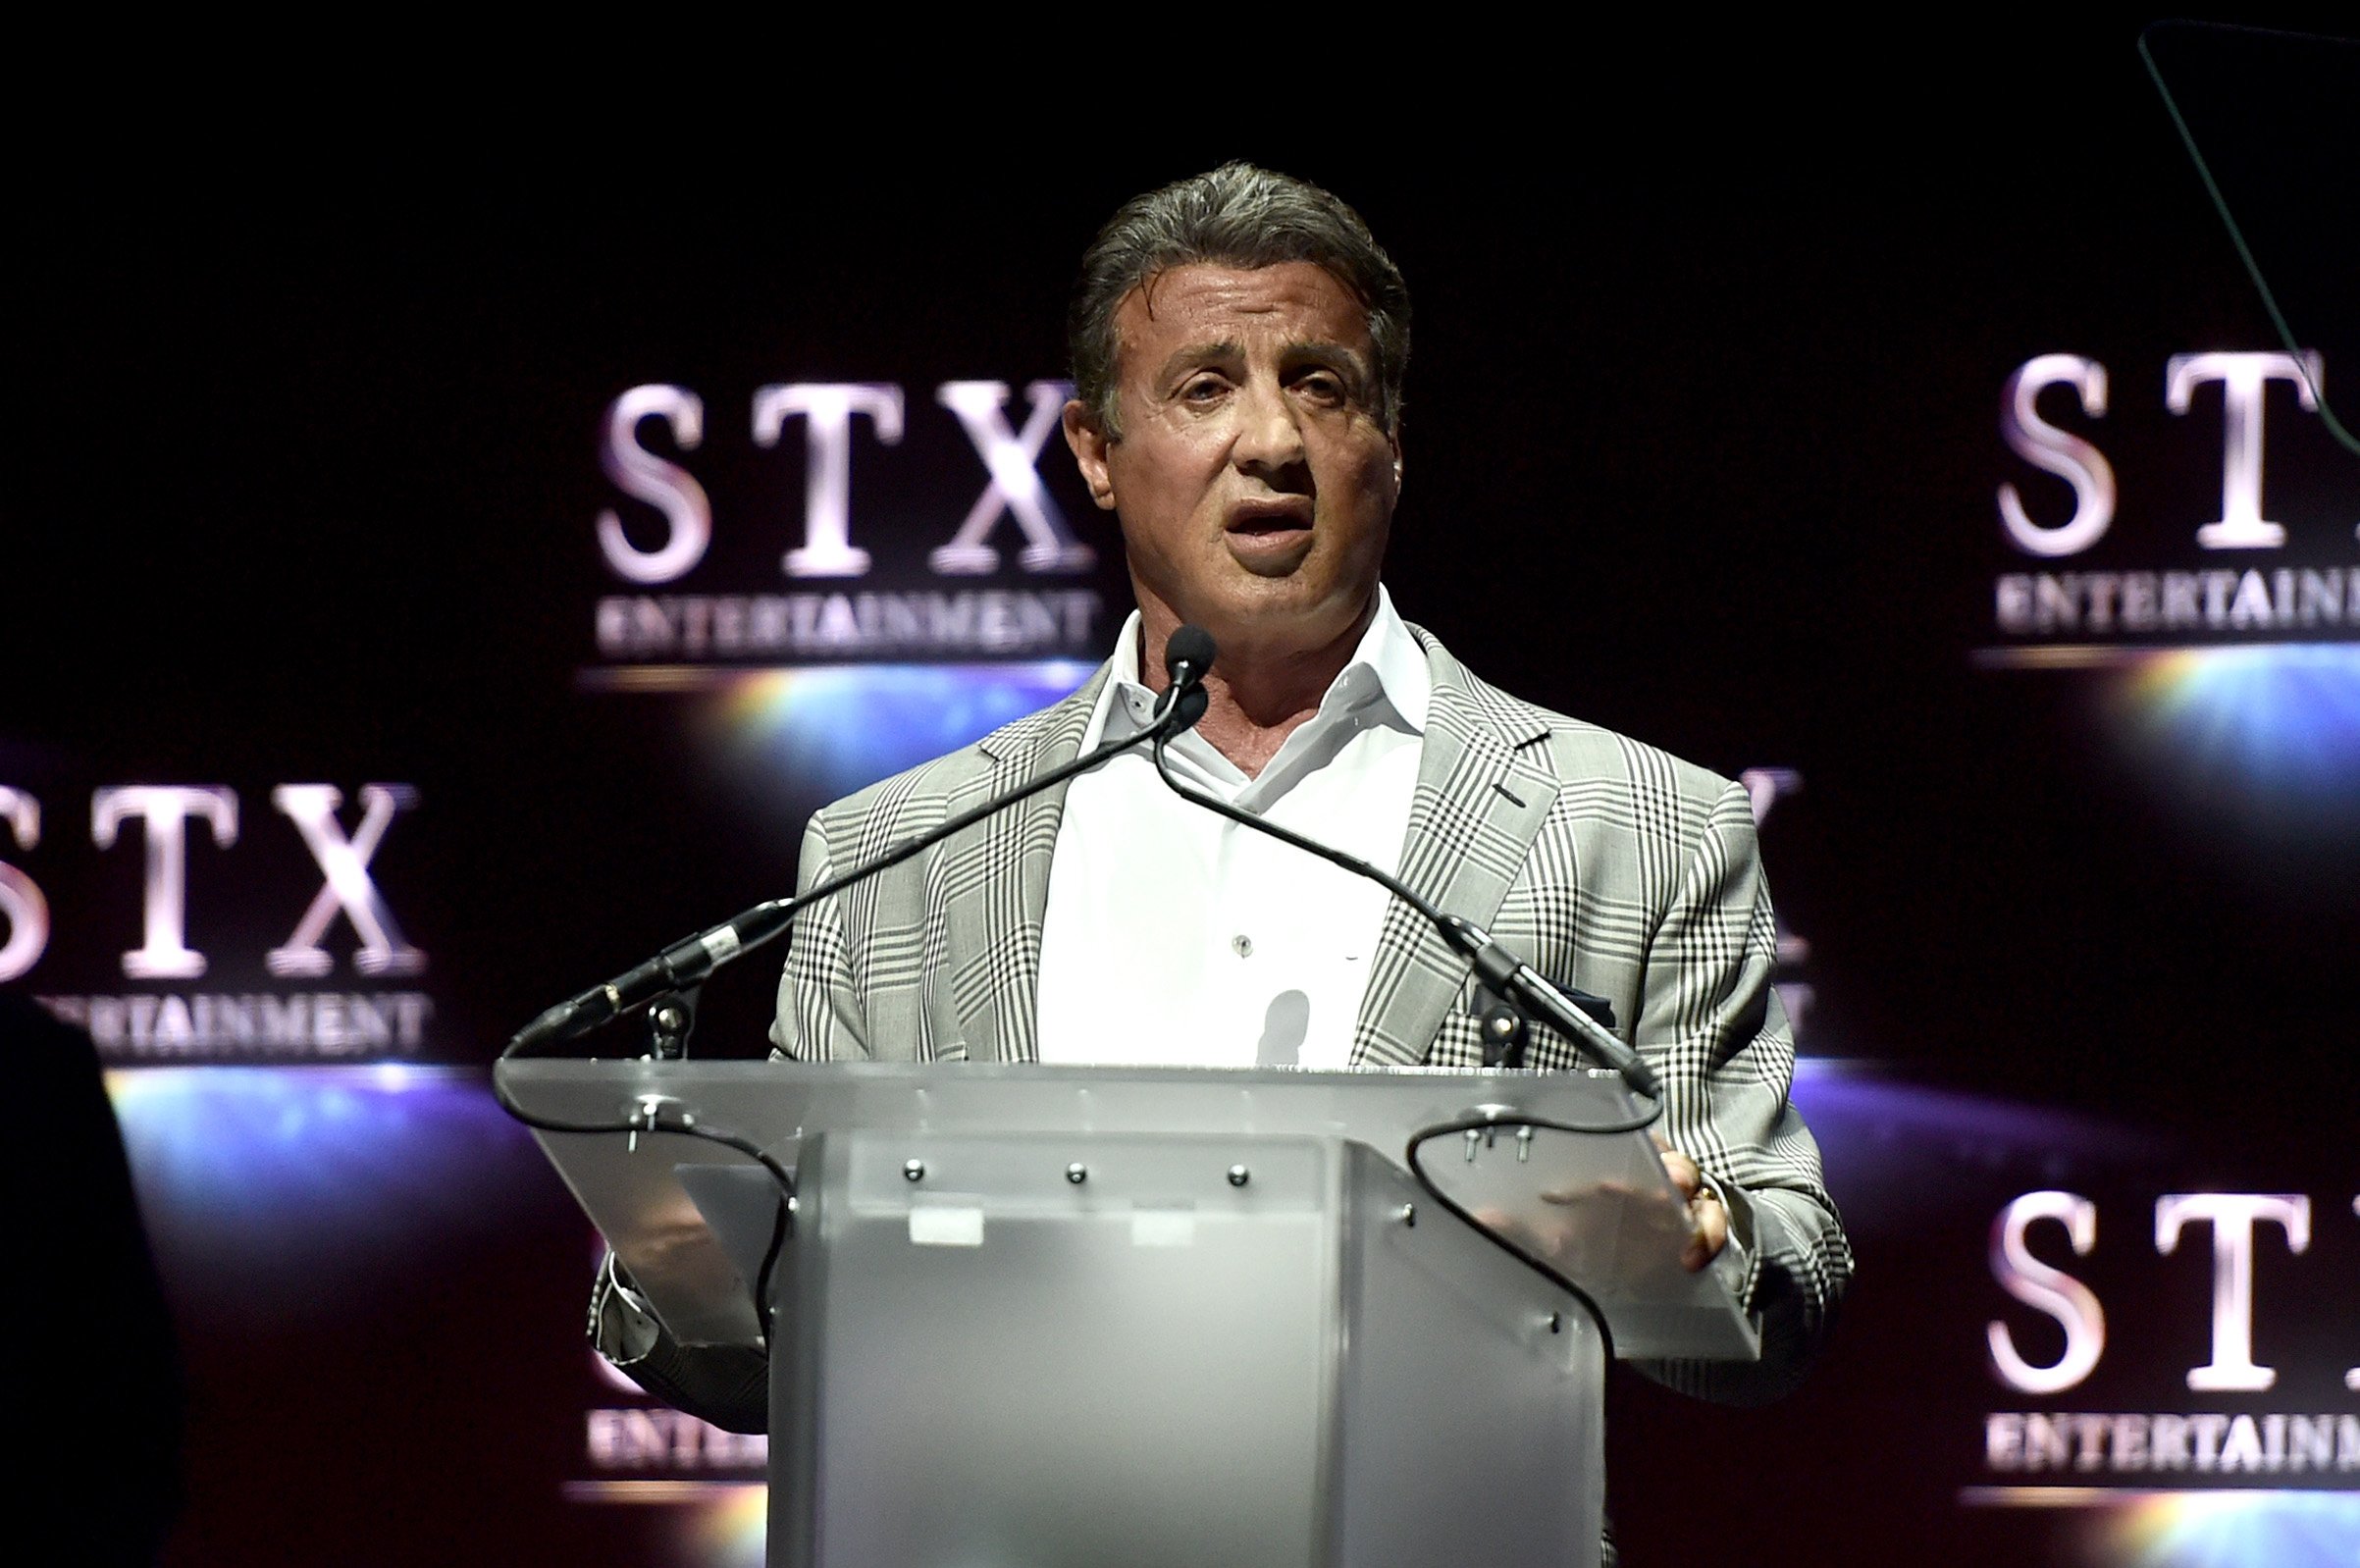 Sylvester Stallone speaks onstage at CinemaCon 2016 on April, 12, 2016 in Las Vegas, Nevada | Source: Getty Images